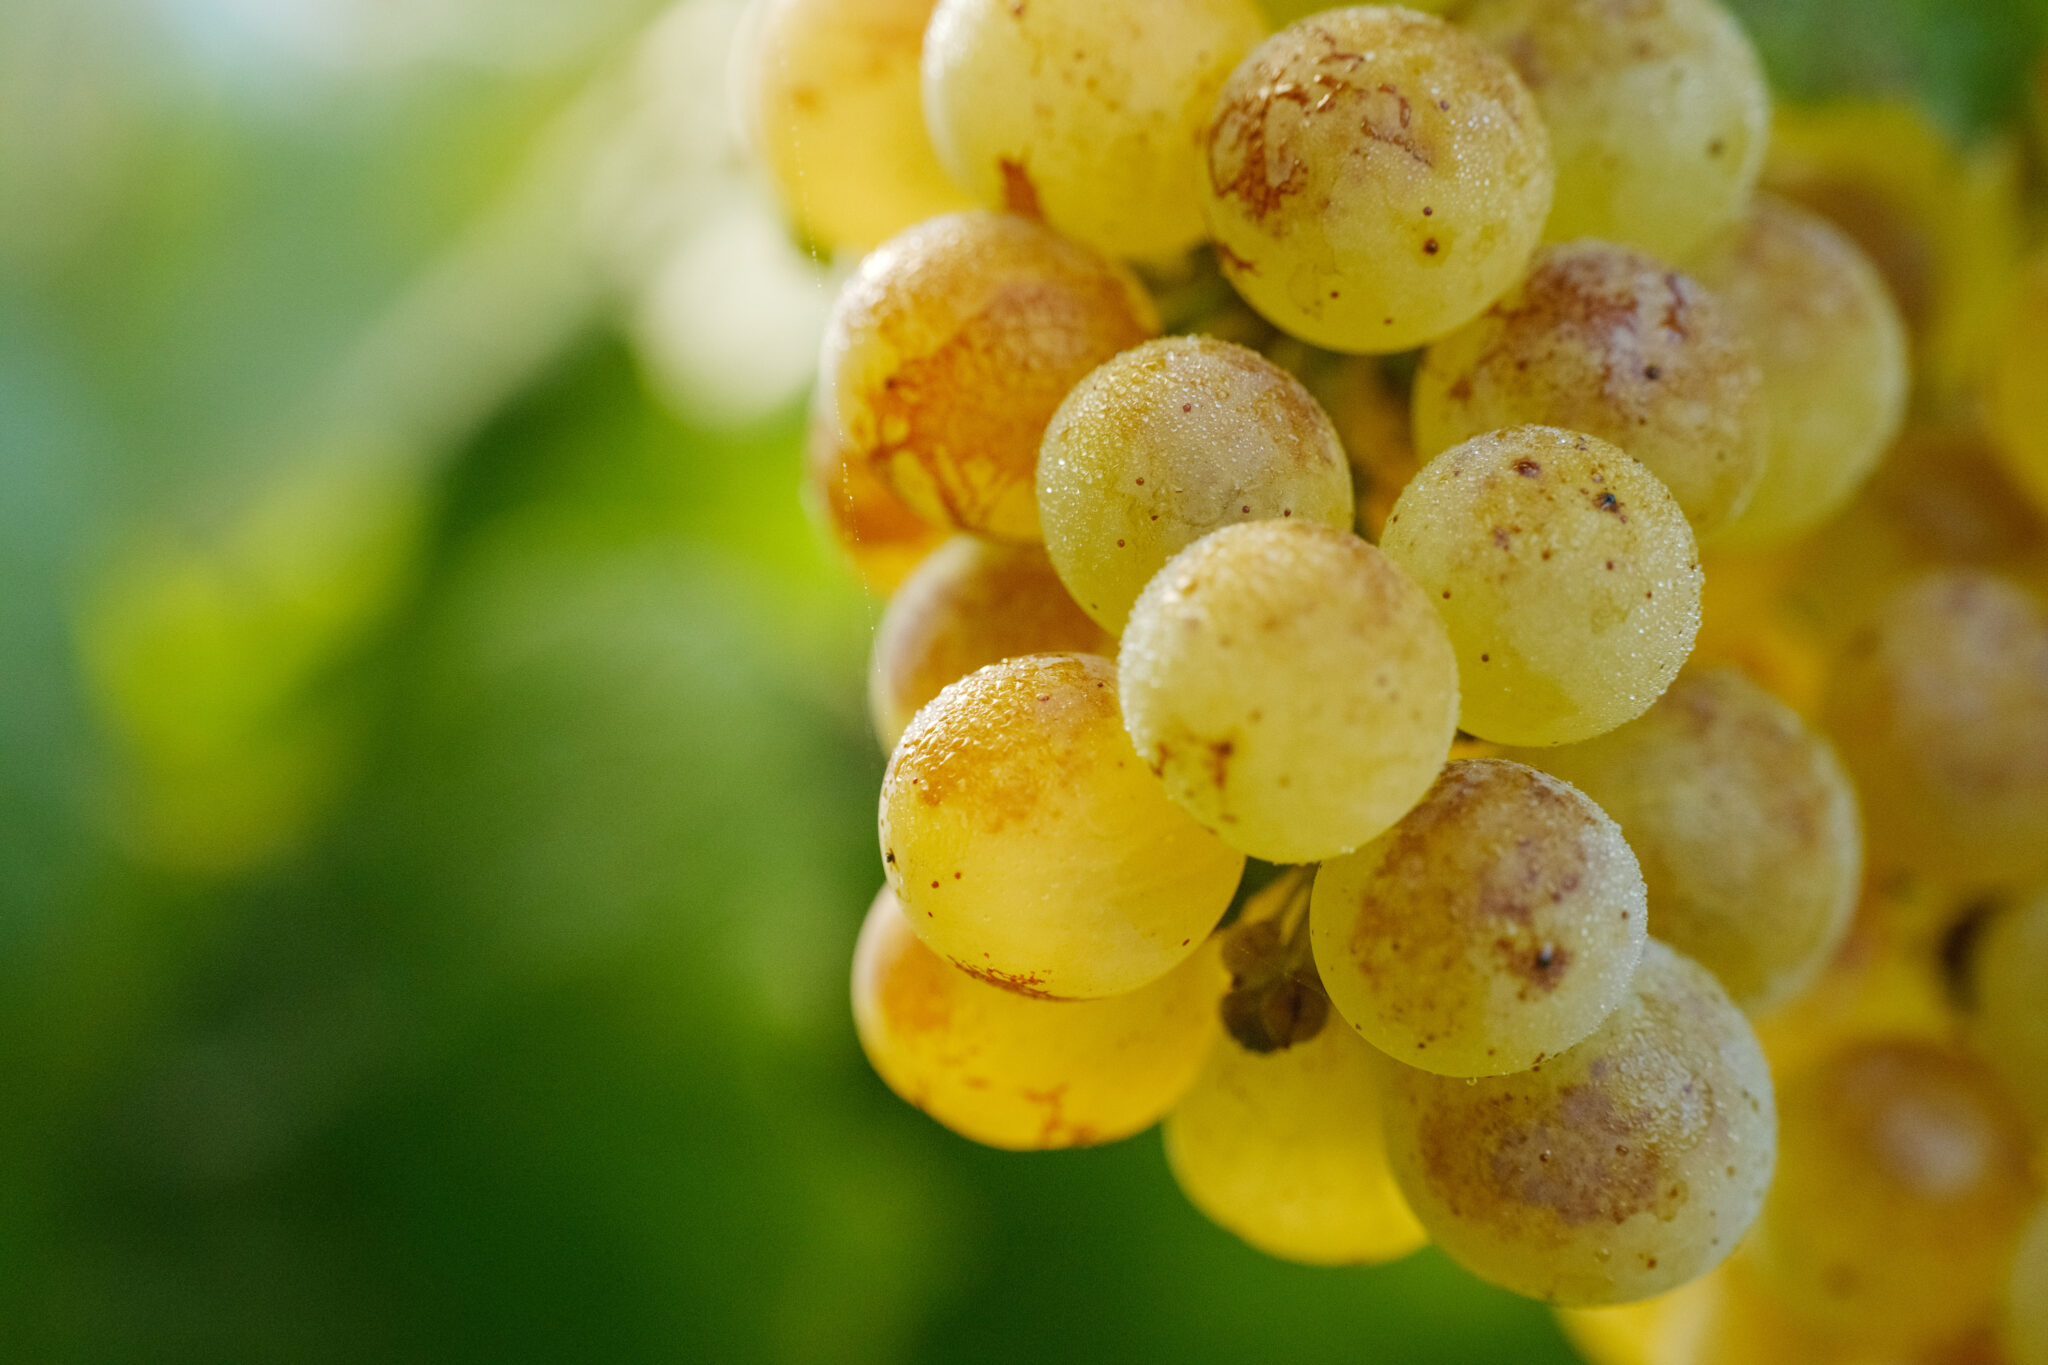 A close-up of grapes hanging in a vineyard